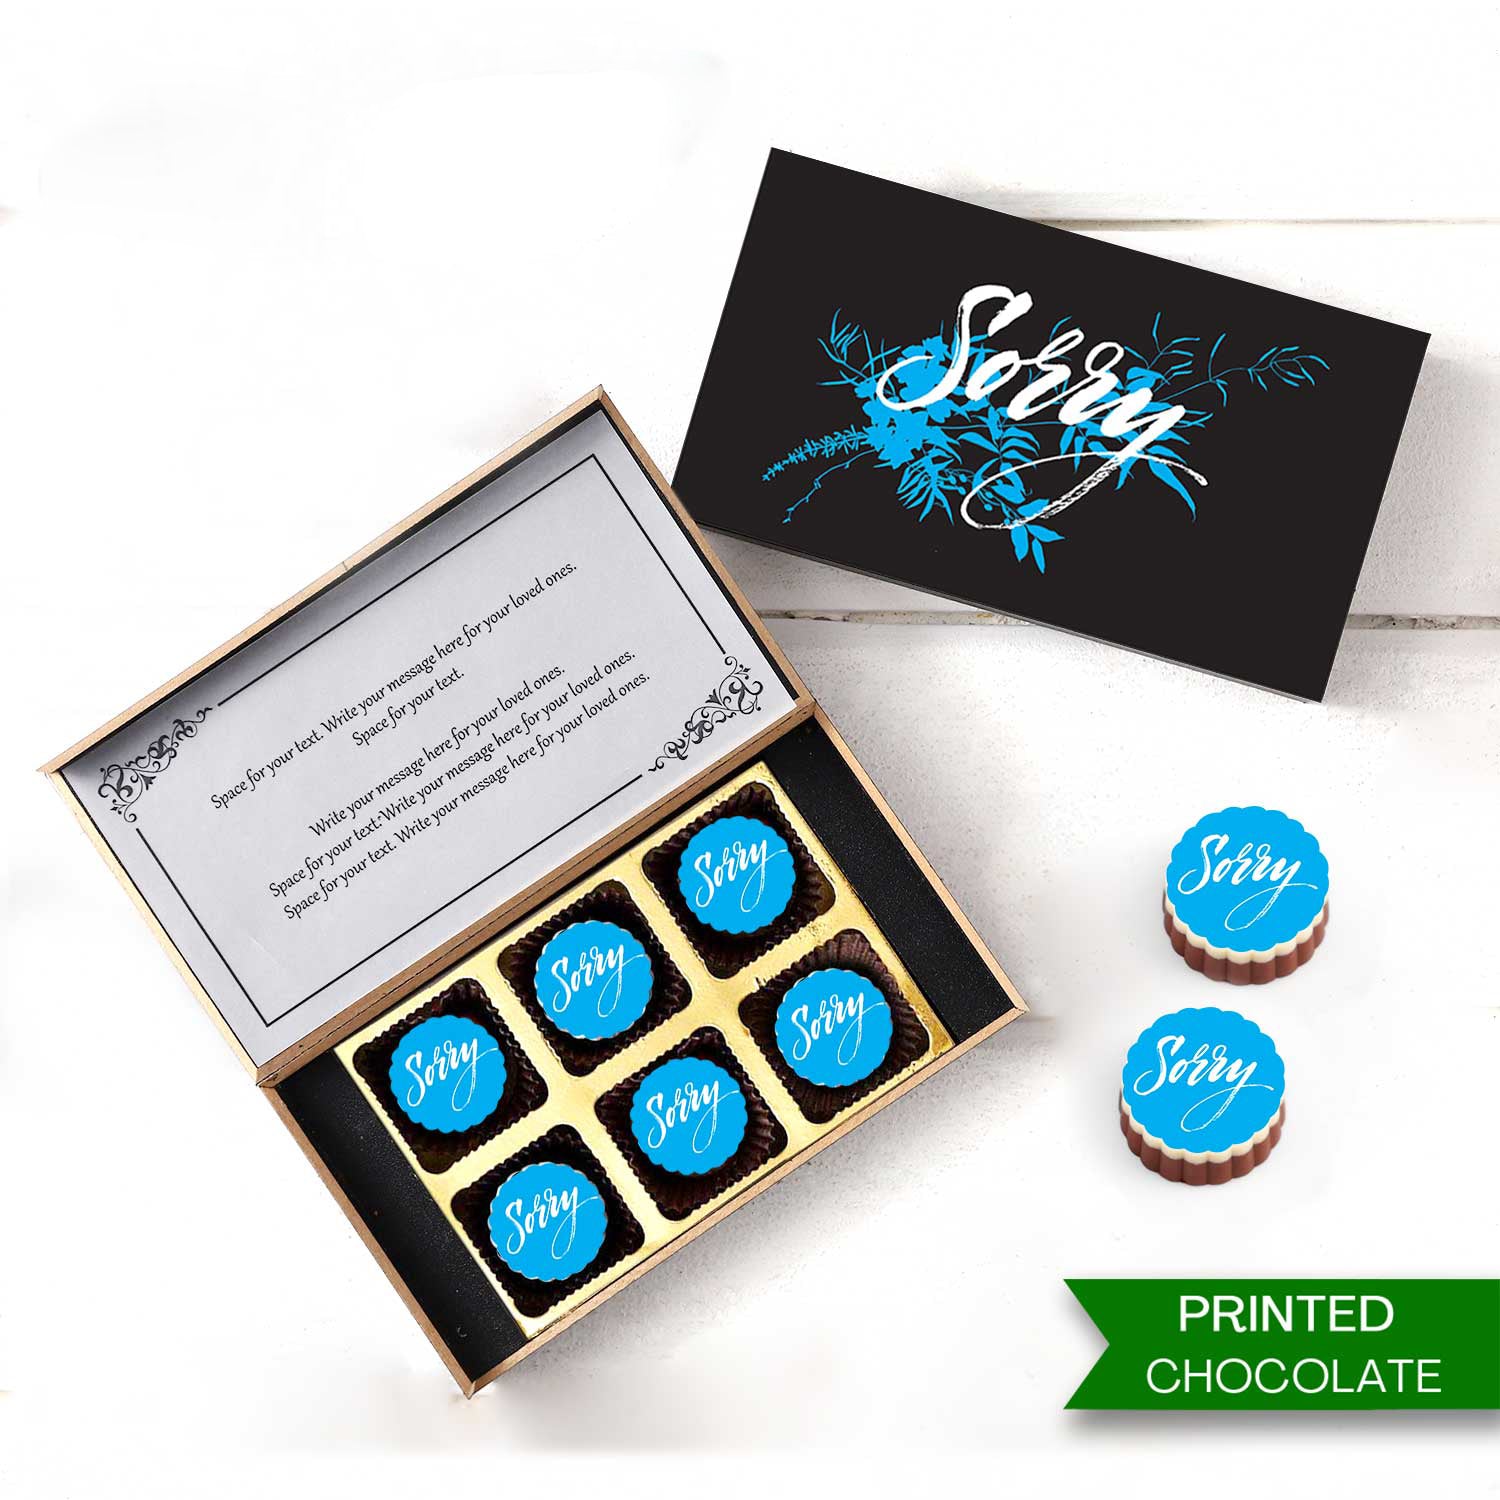 Chocolate Gifts - Buy Chocolate Gifts online in India